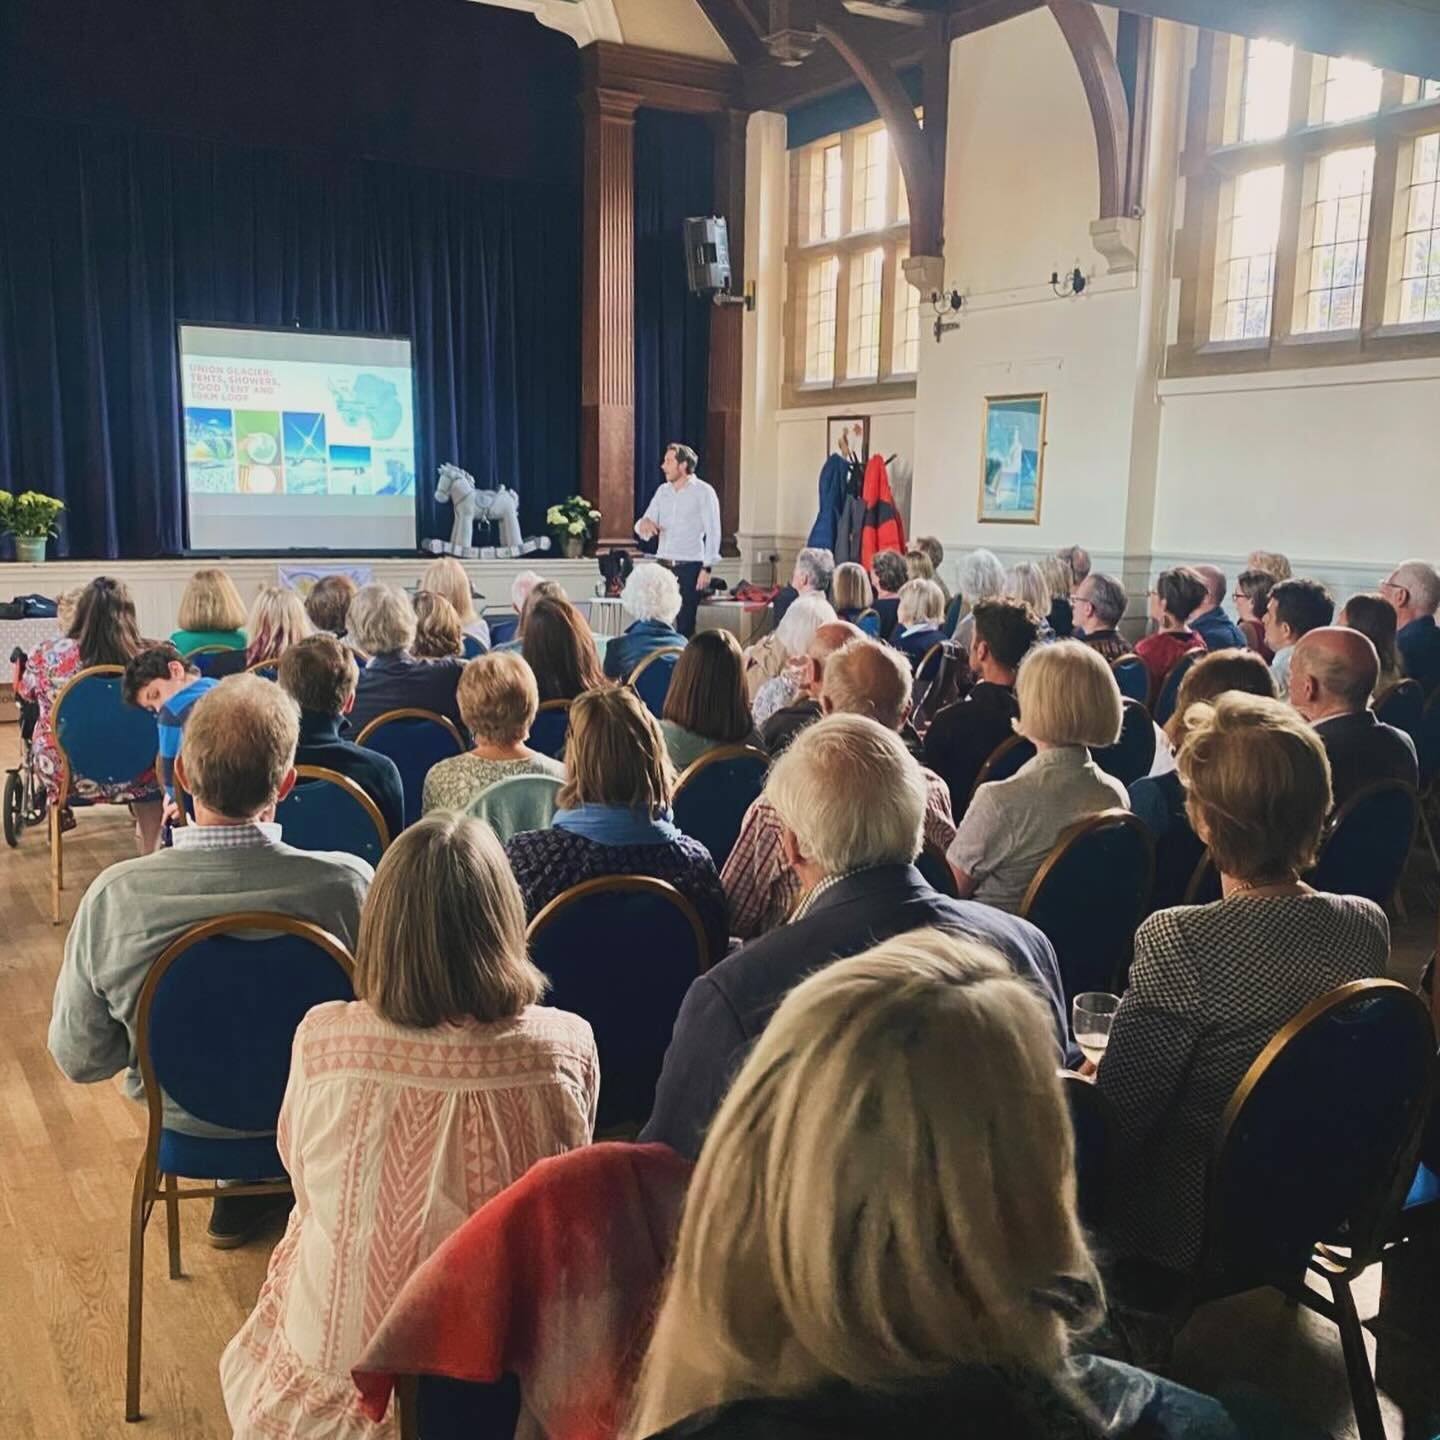 Final talk last Friday, this time where I grew up in Penshurst, Kent. We had over 70 people attend with ages from 7-94 yrs old and raised some more funds for @rockinghorse67 and @kidscape 

Thanks for all those who attended, lovely to have friends an